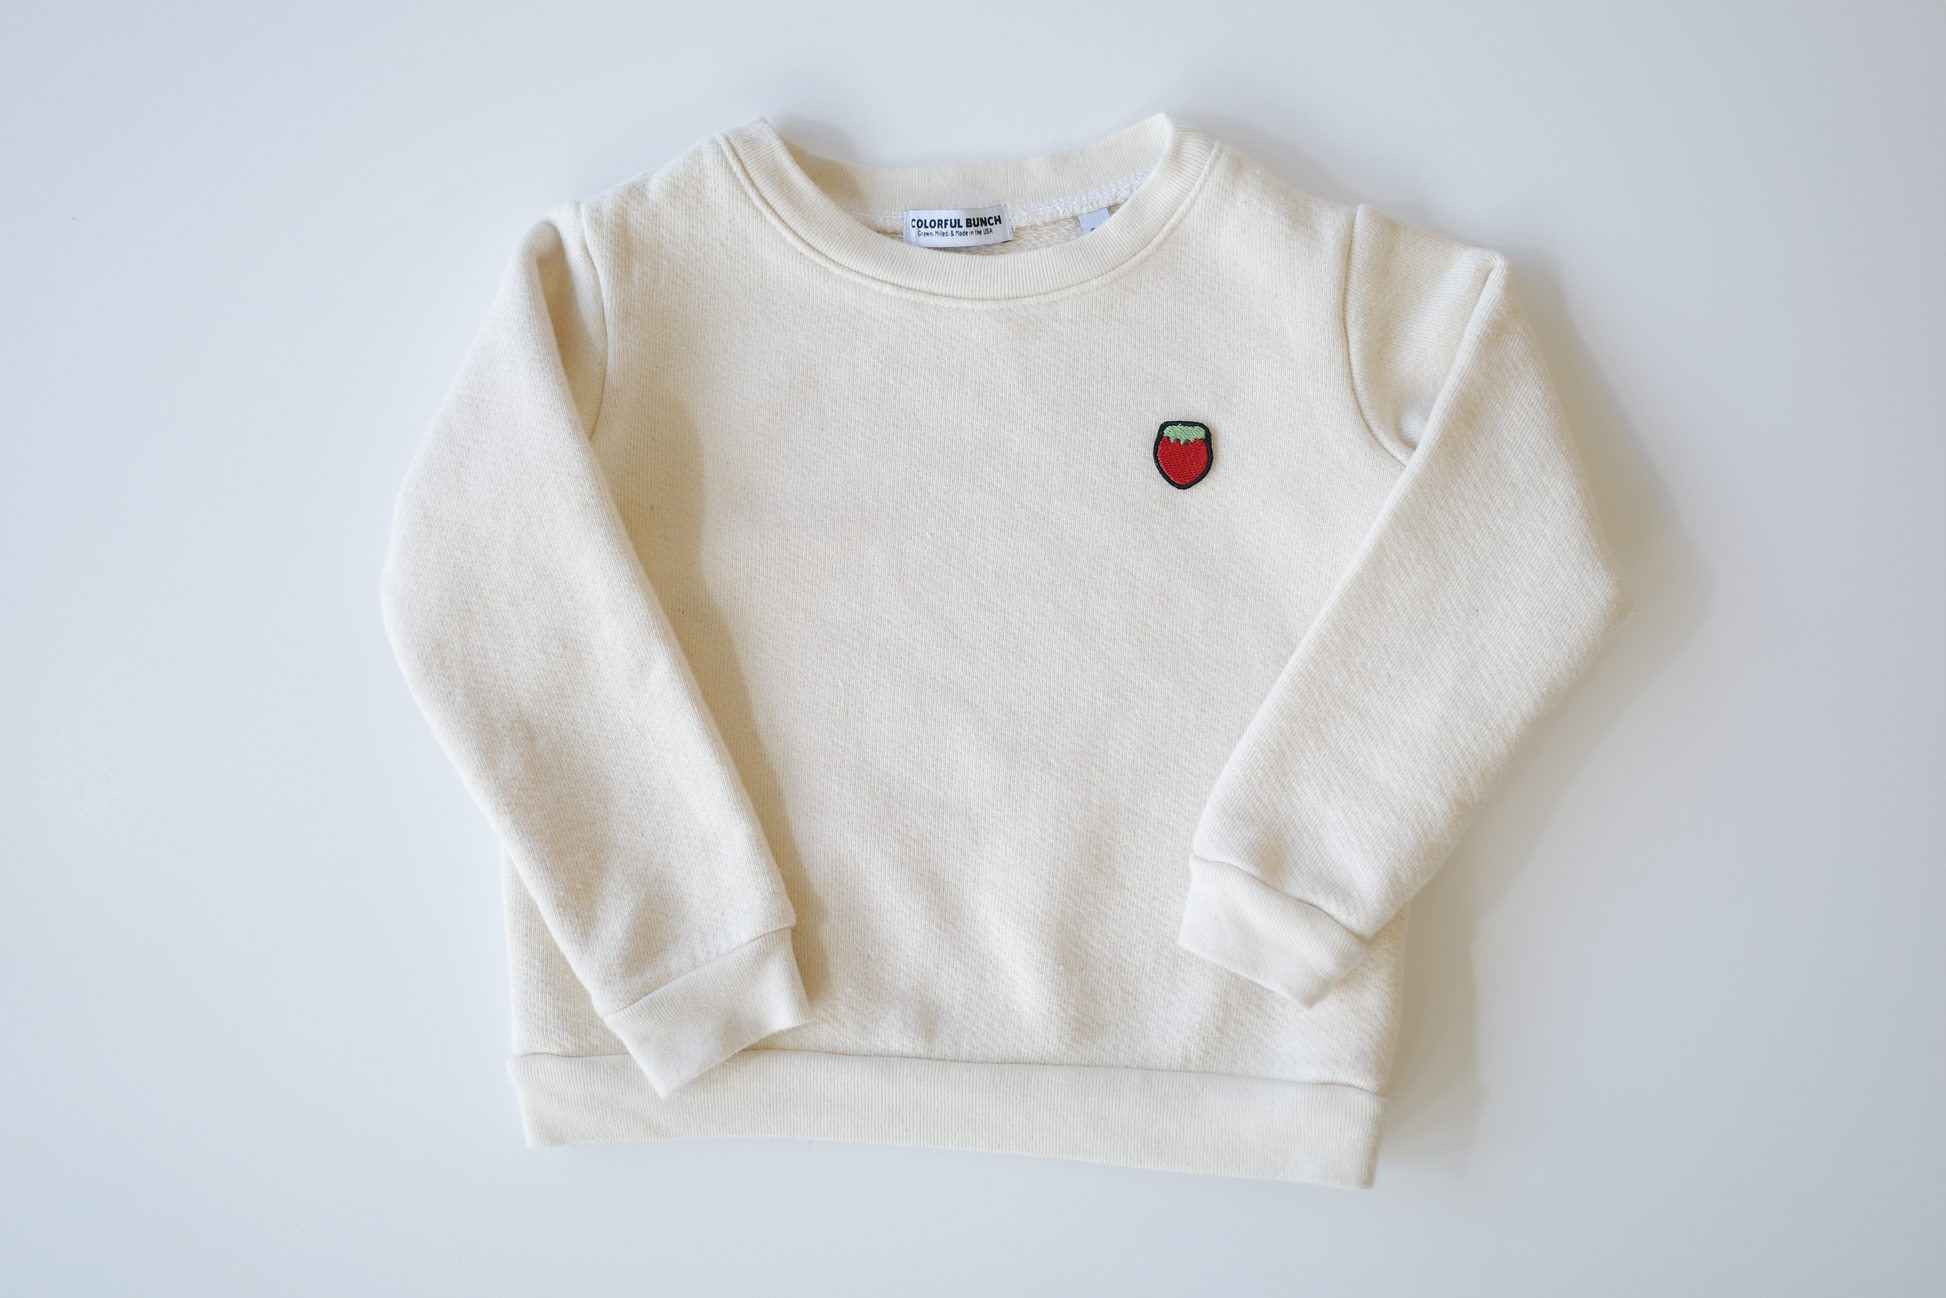 Unbleached, pure organic cotton children's sweater showcasing a sweet strawberry embroidery, sourced and crafted in the USA, part of Colorful Bunch's eco-friendly apparel collection for kids.